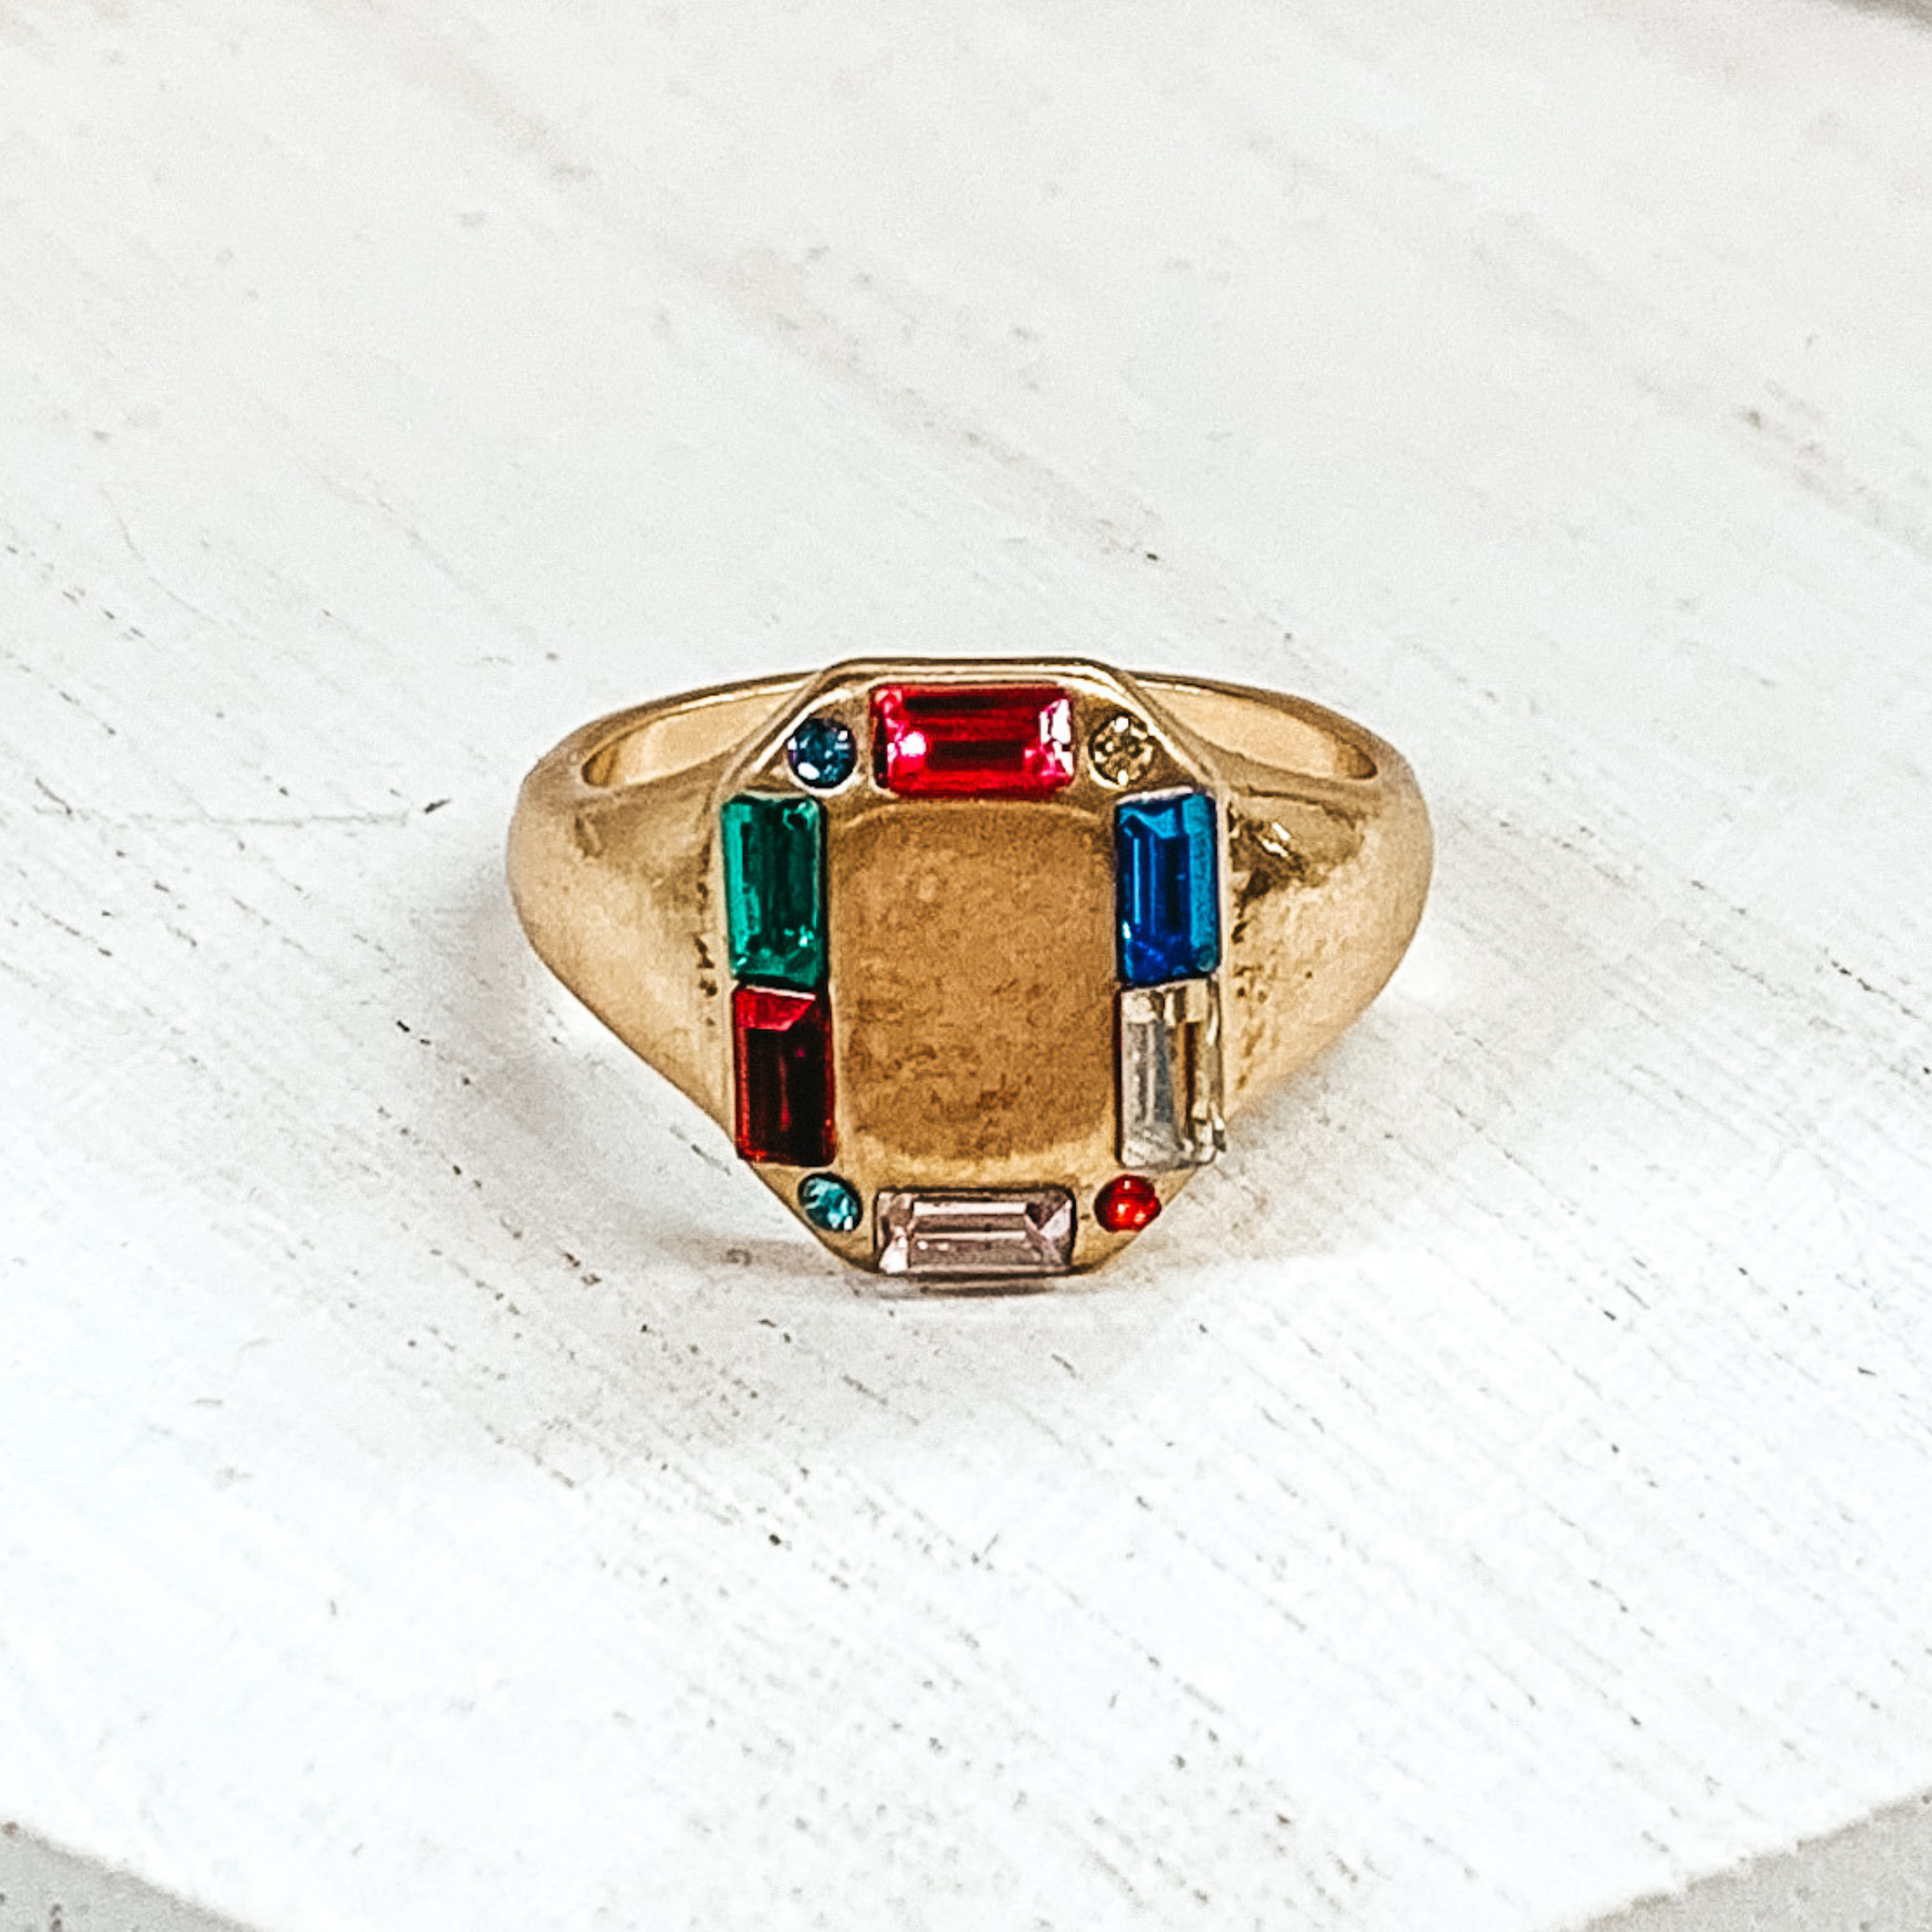 Thick gold band with a rectangle shaped front. The rectangle part includes small, multicolored crystals outlining it. This ring is pictured on a white background. 